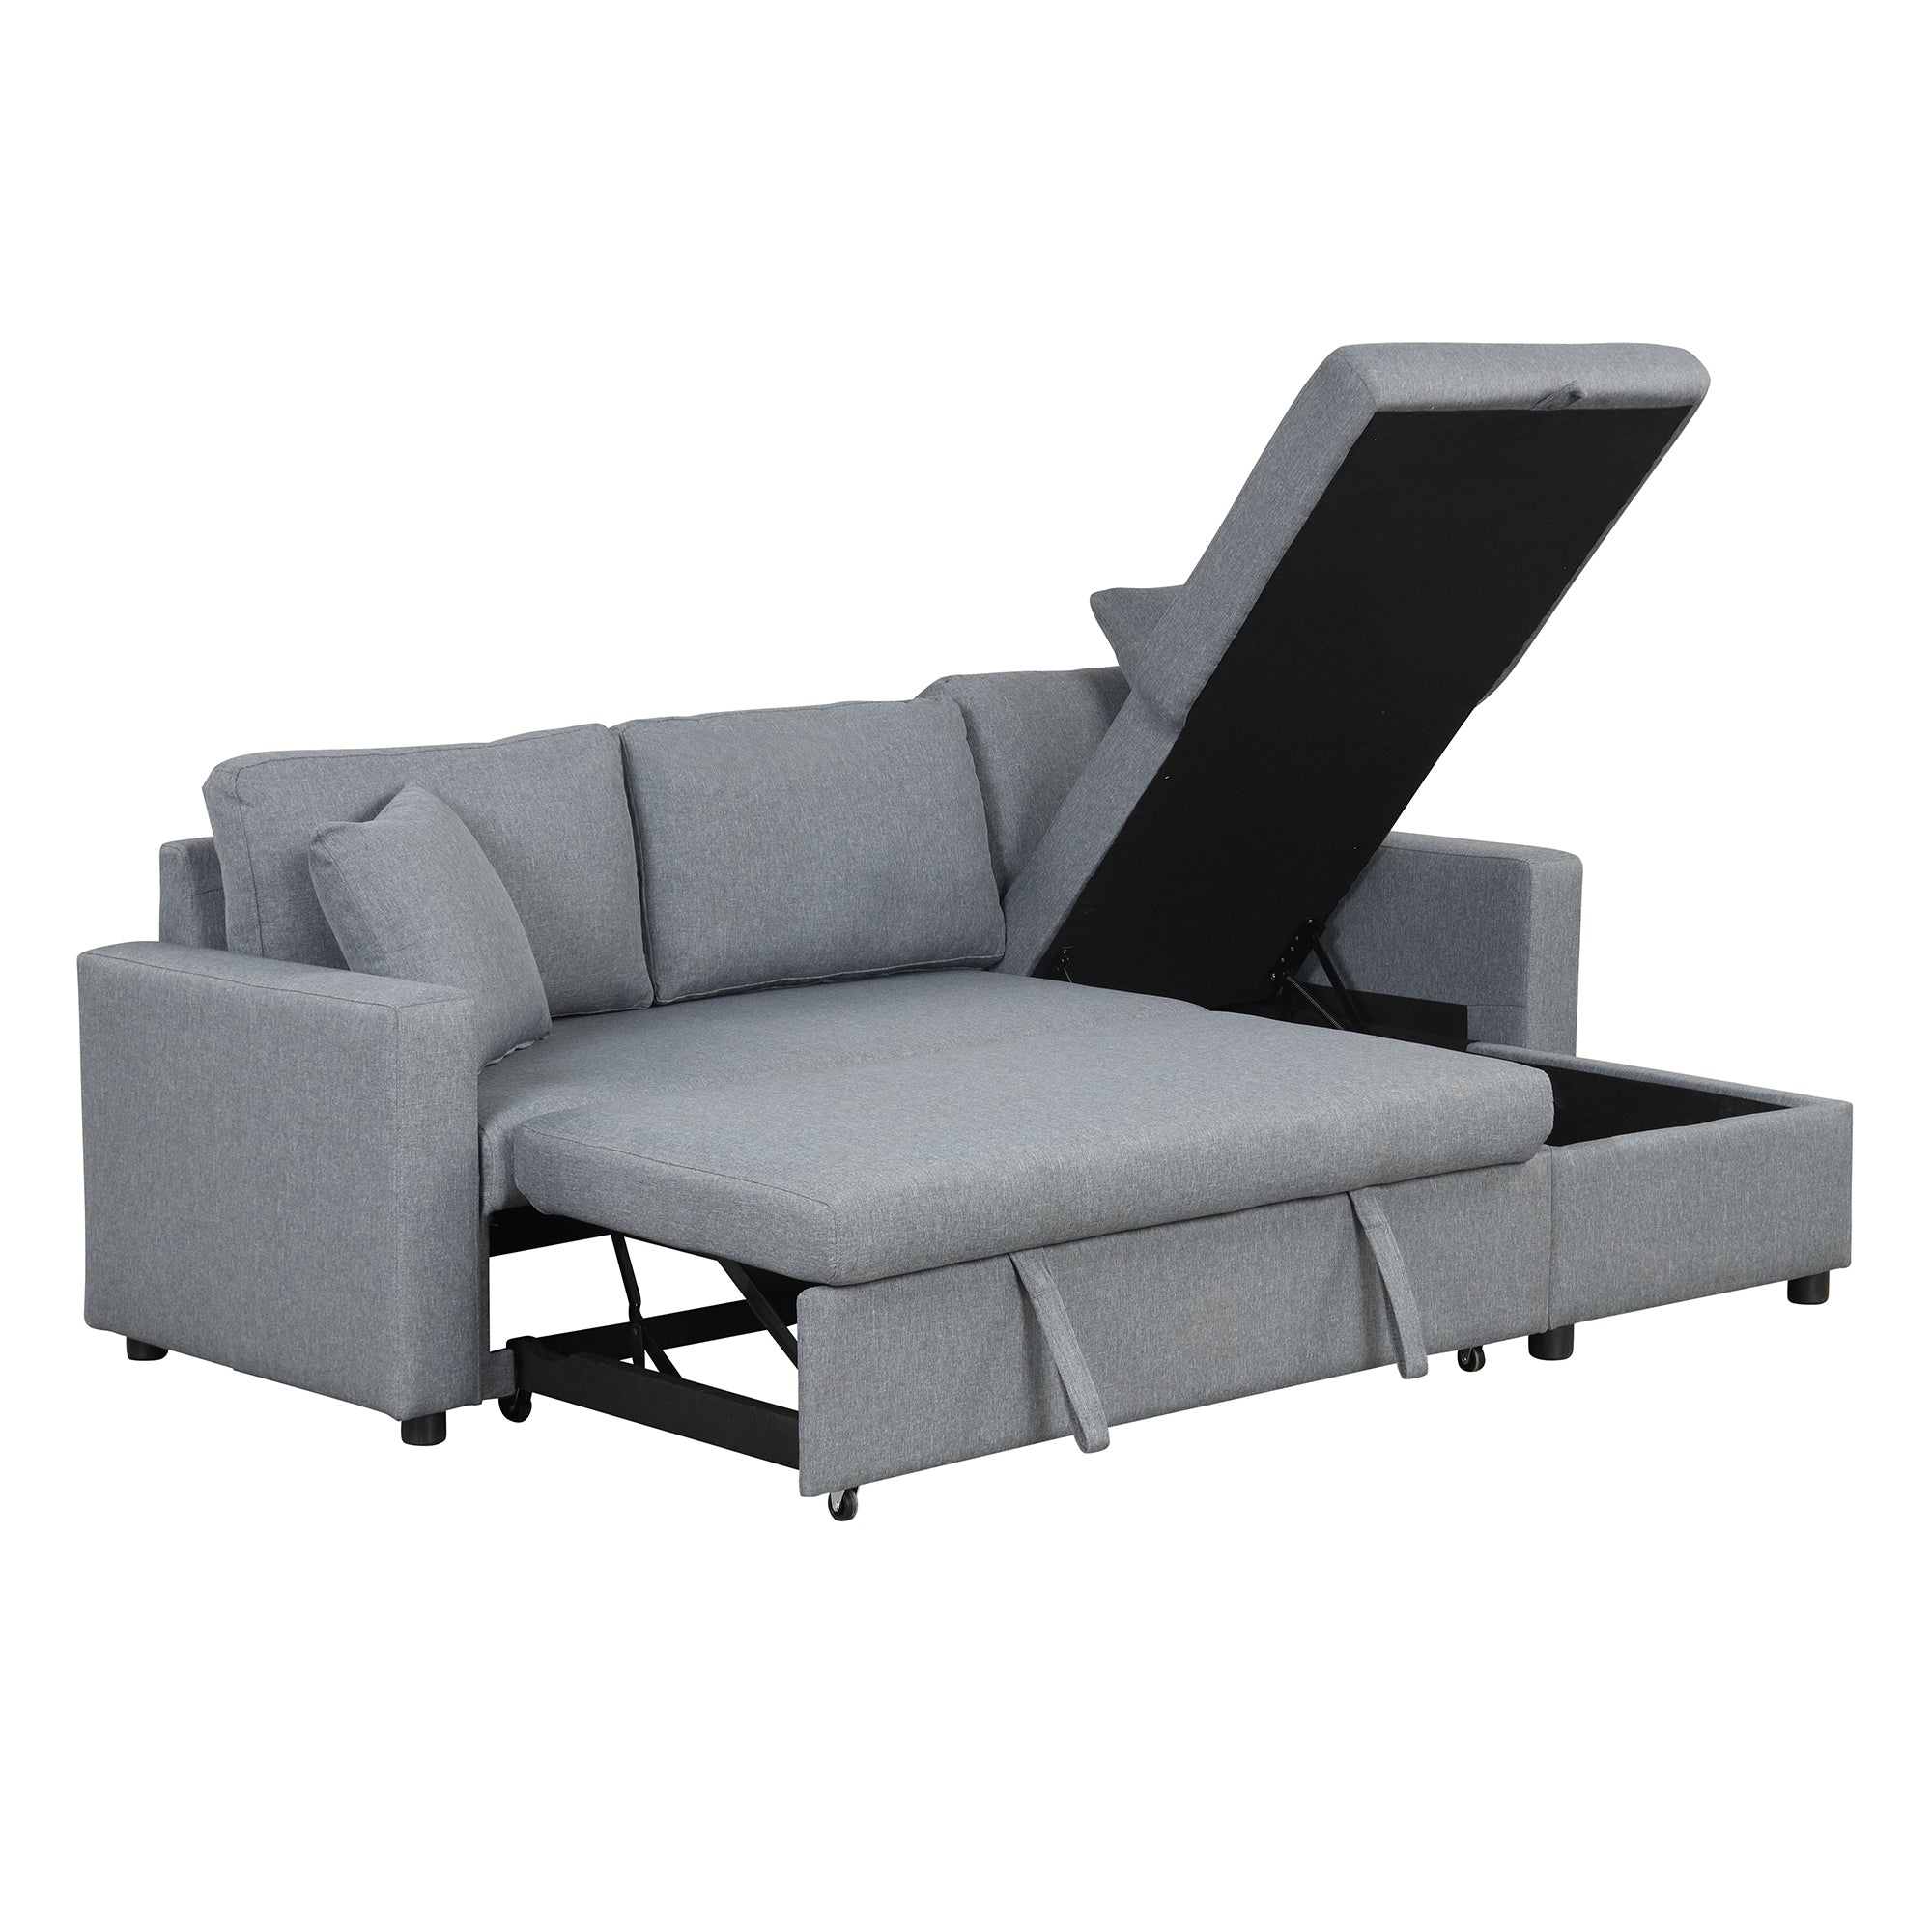 Grey Upholstery Sleeper Sectional Sofa: Storage, 2 Tossing Cushions-Sleeper Sectionals-American Furniture Outlet